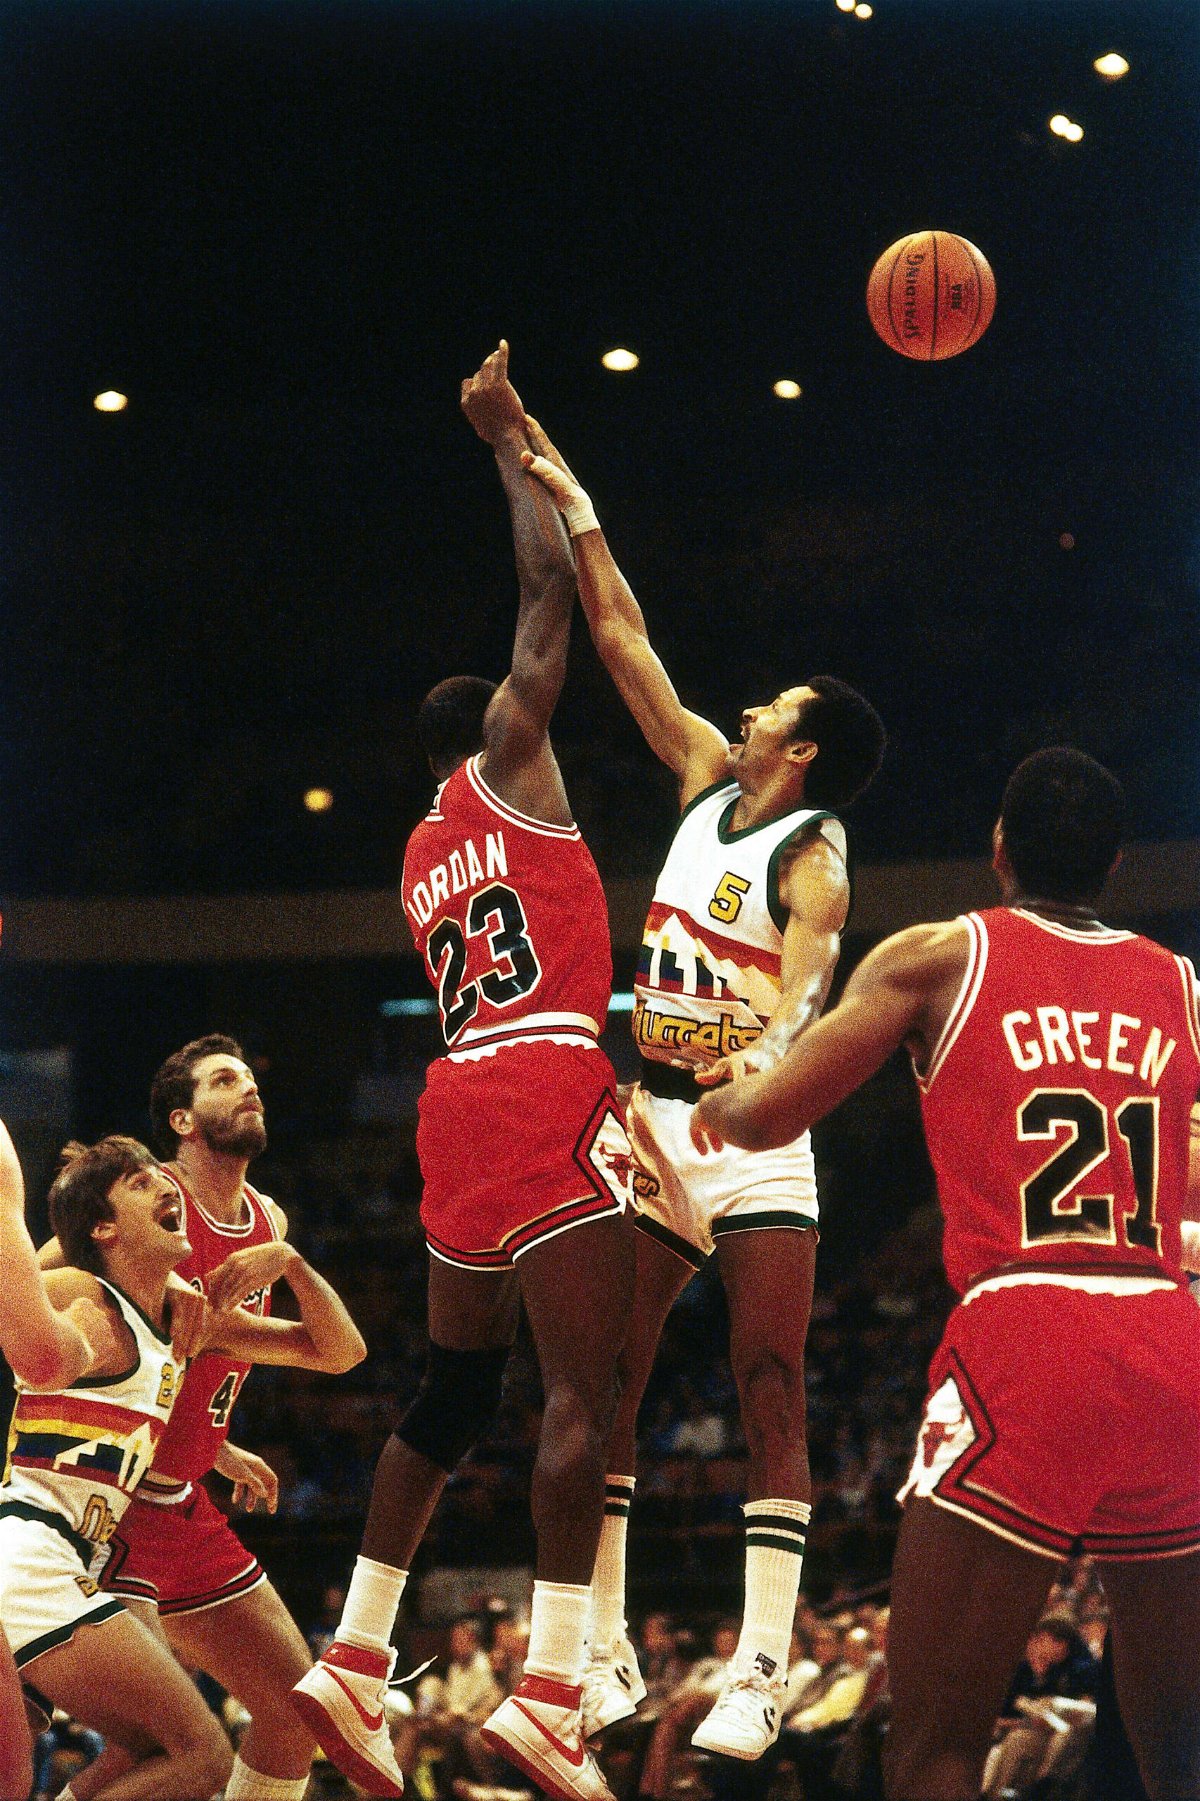 <i>John Betancourt/NBAE/Getty Images</i><br/>Michael Jordan playing for the Chicago Bulls during the 1984 NBA game in Denver